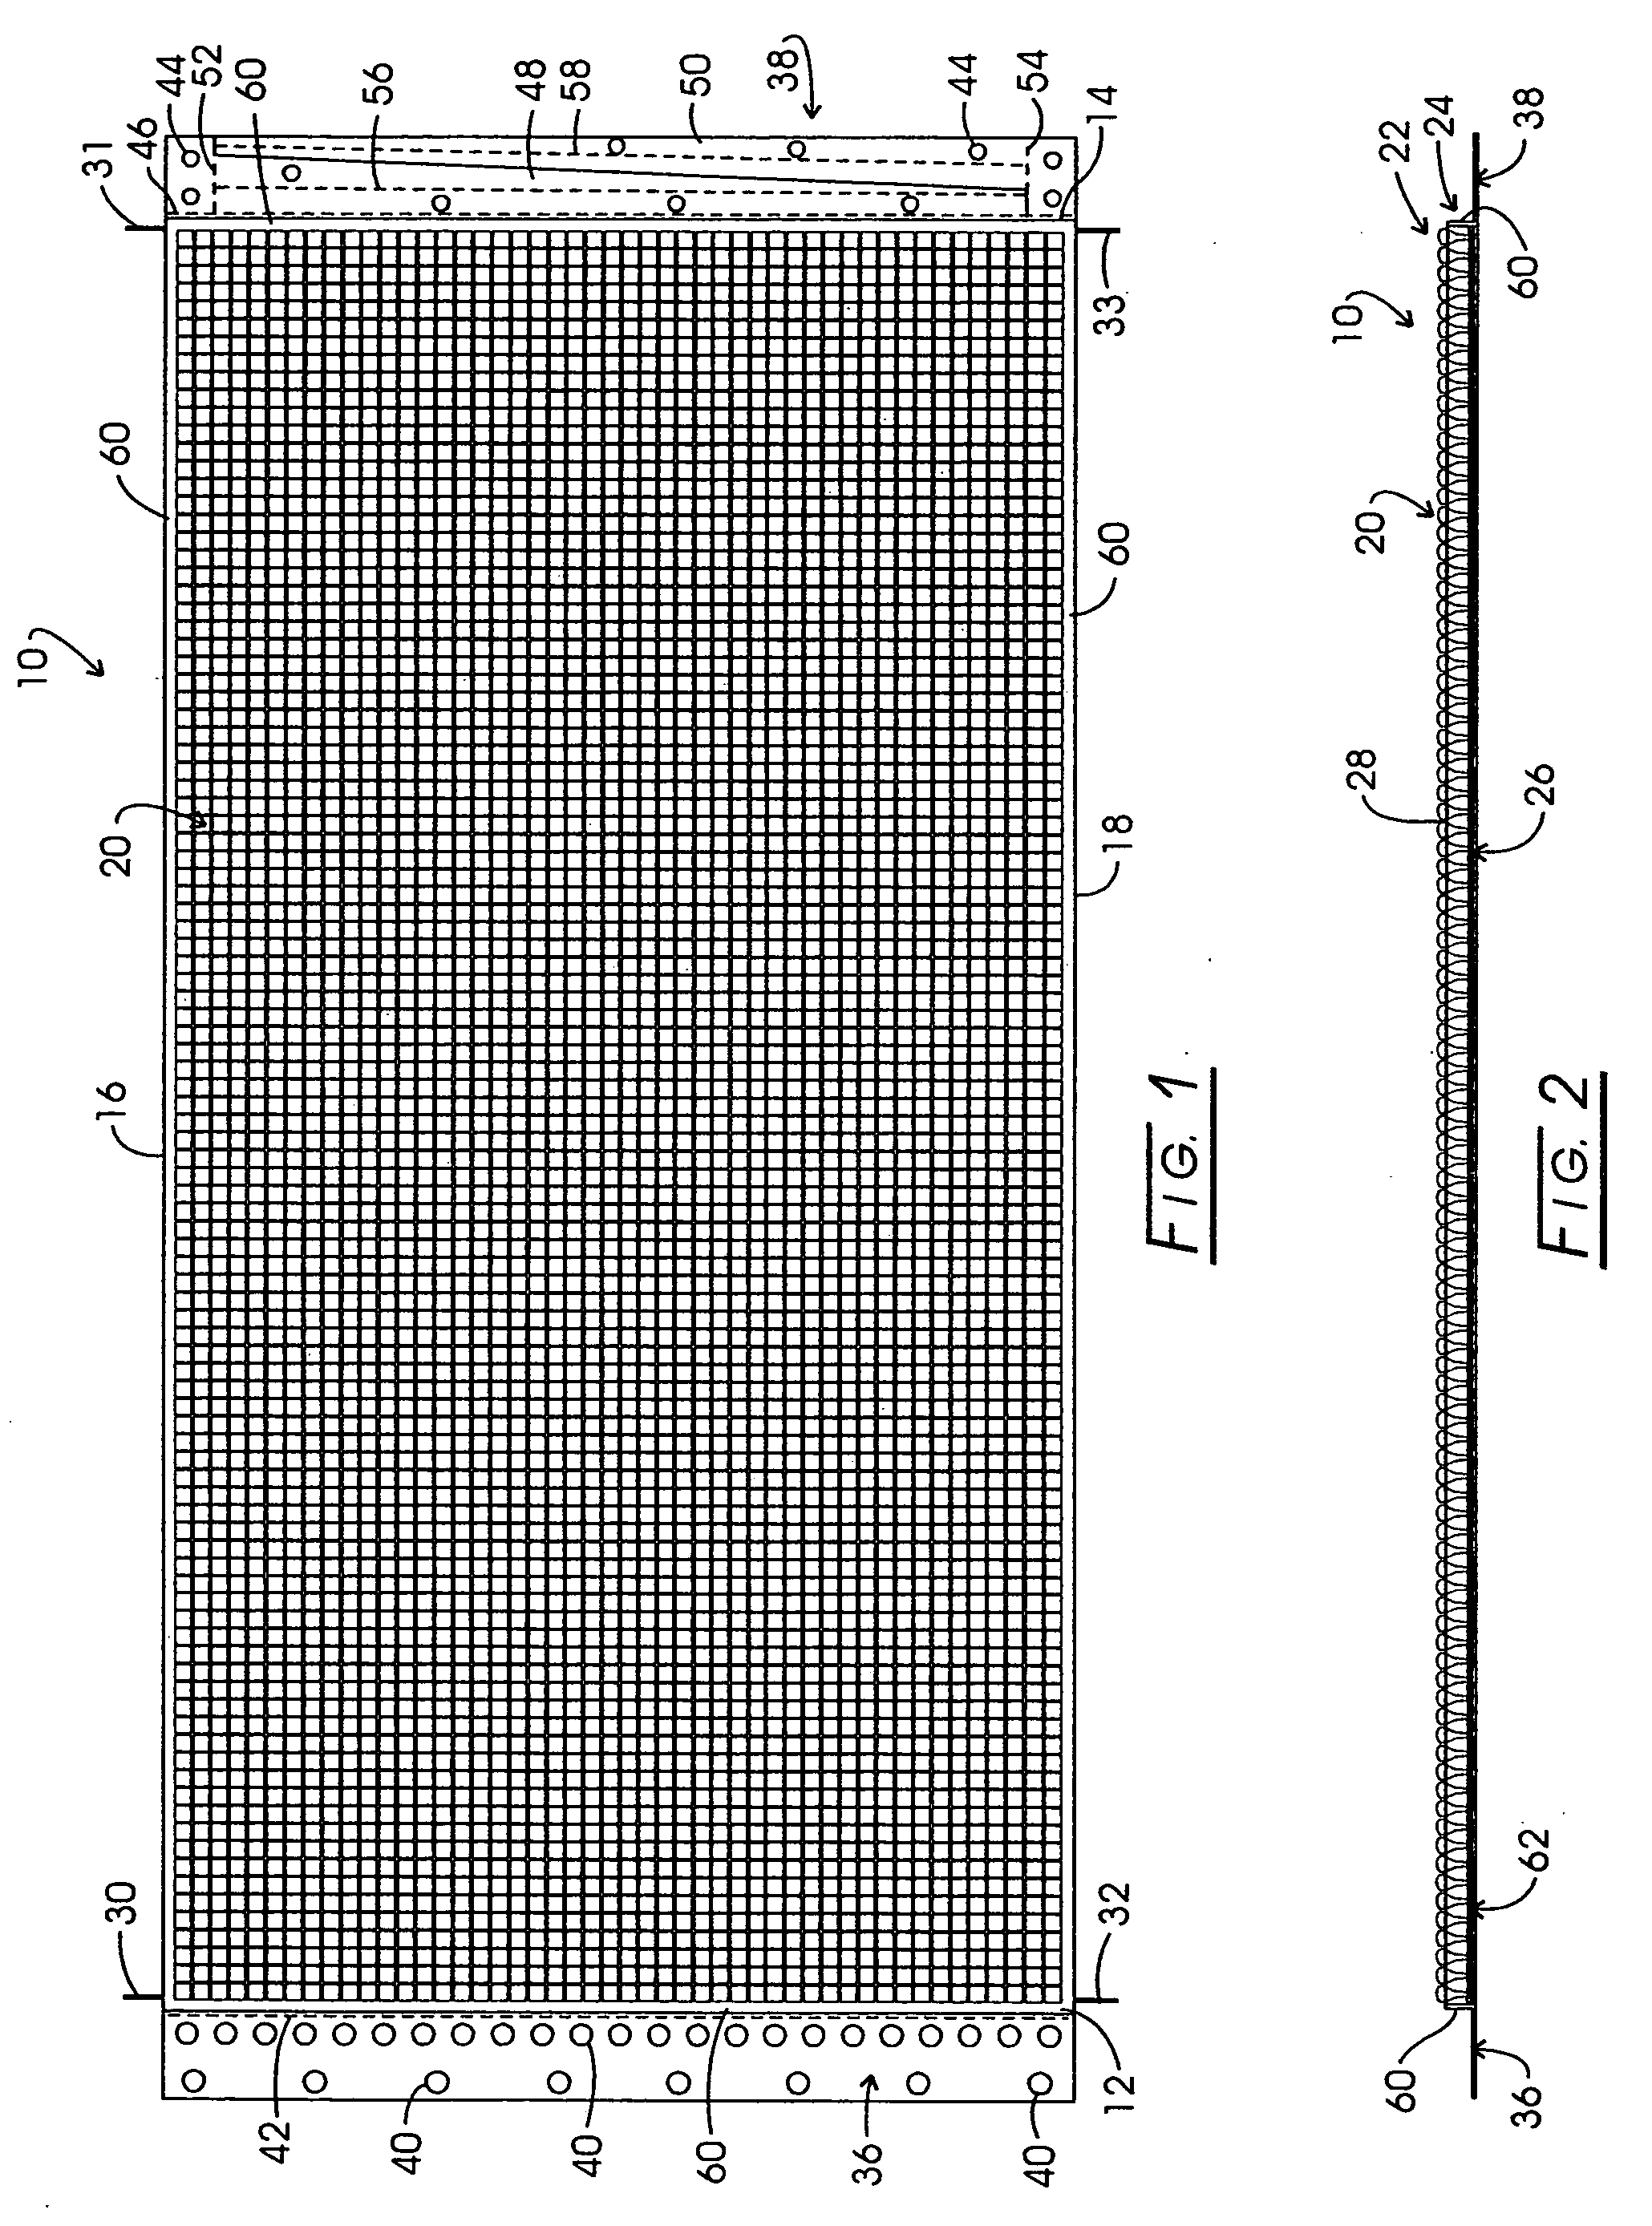 Solar panels with liquid superconcentrators exhibiting wide fields of view